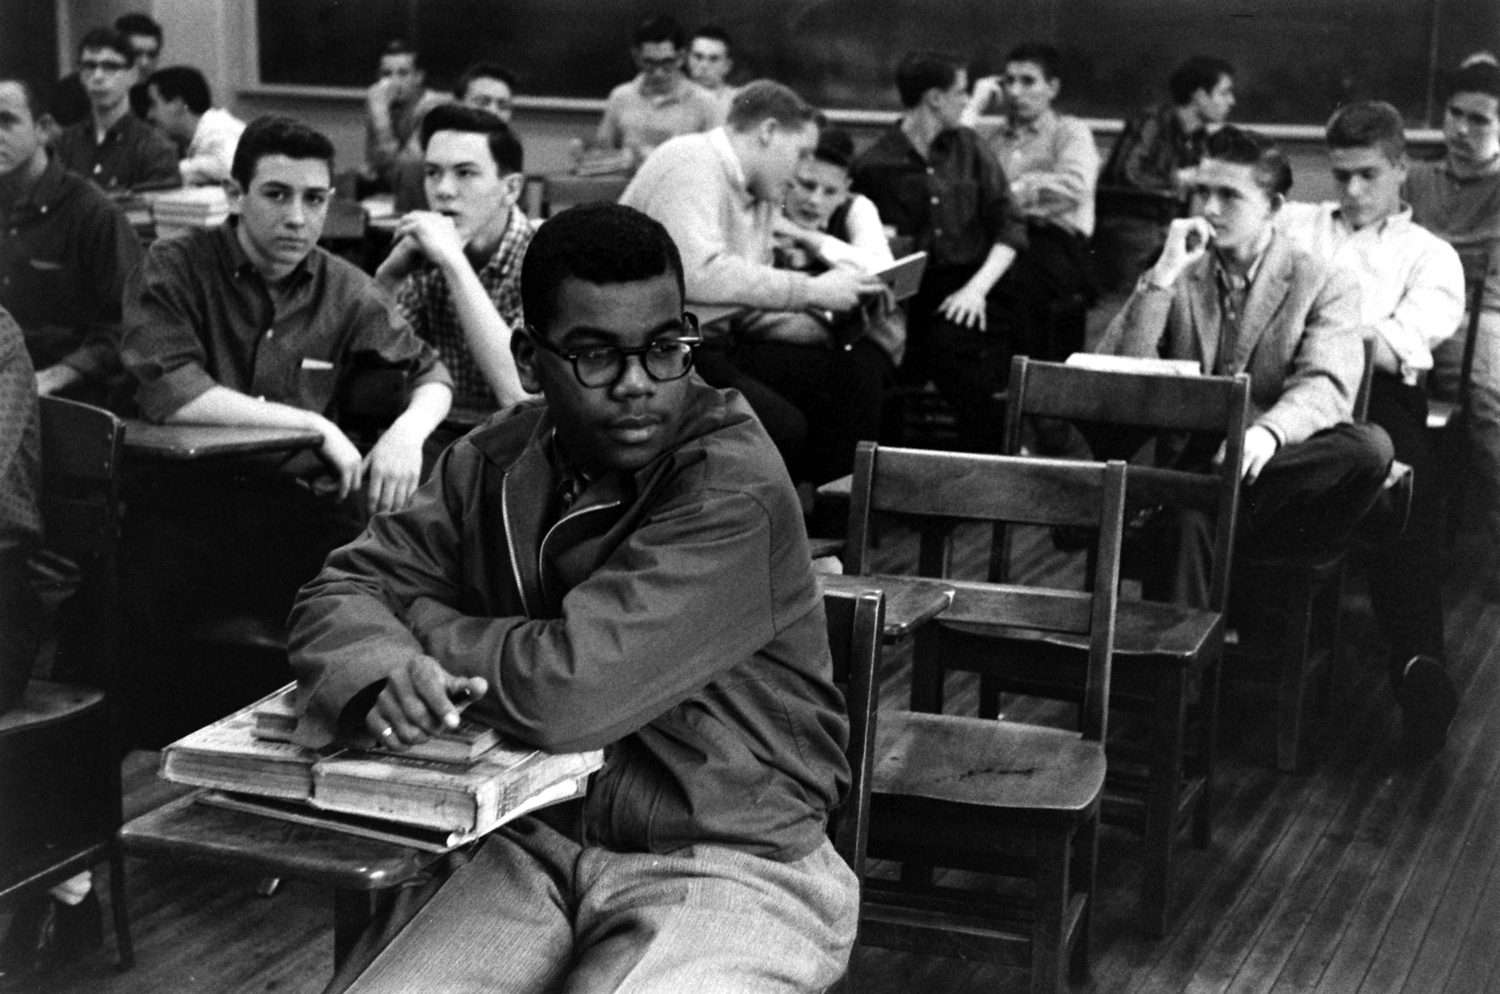 Brown vs. Board of Education was a civil rights victory with unintended circumstances